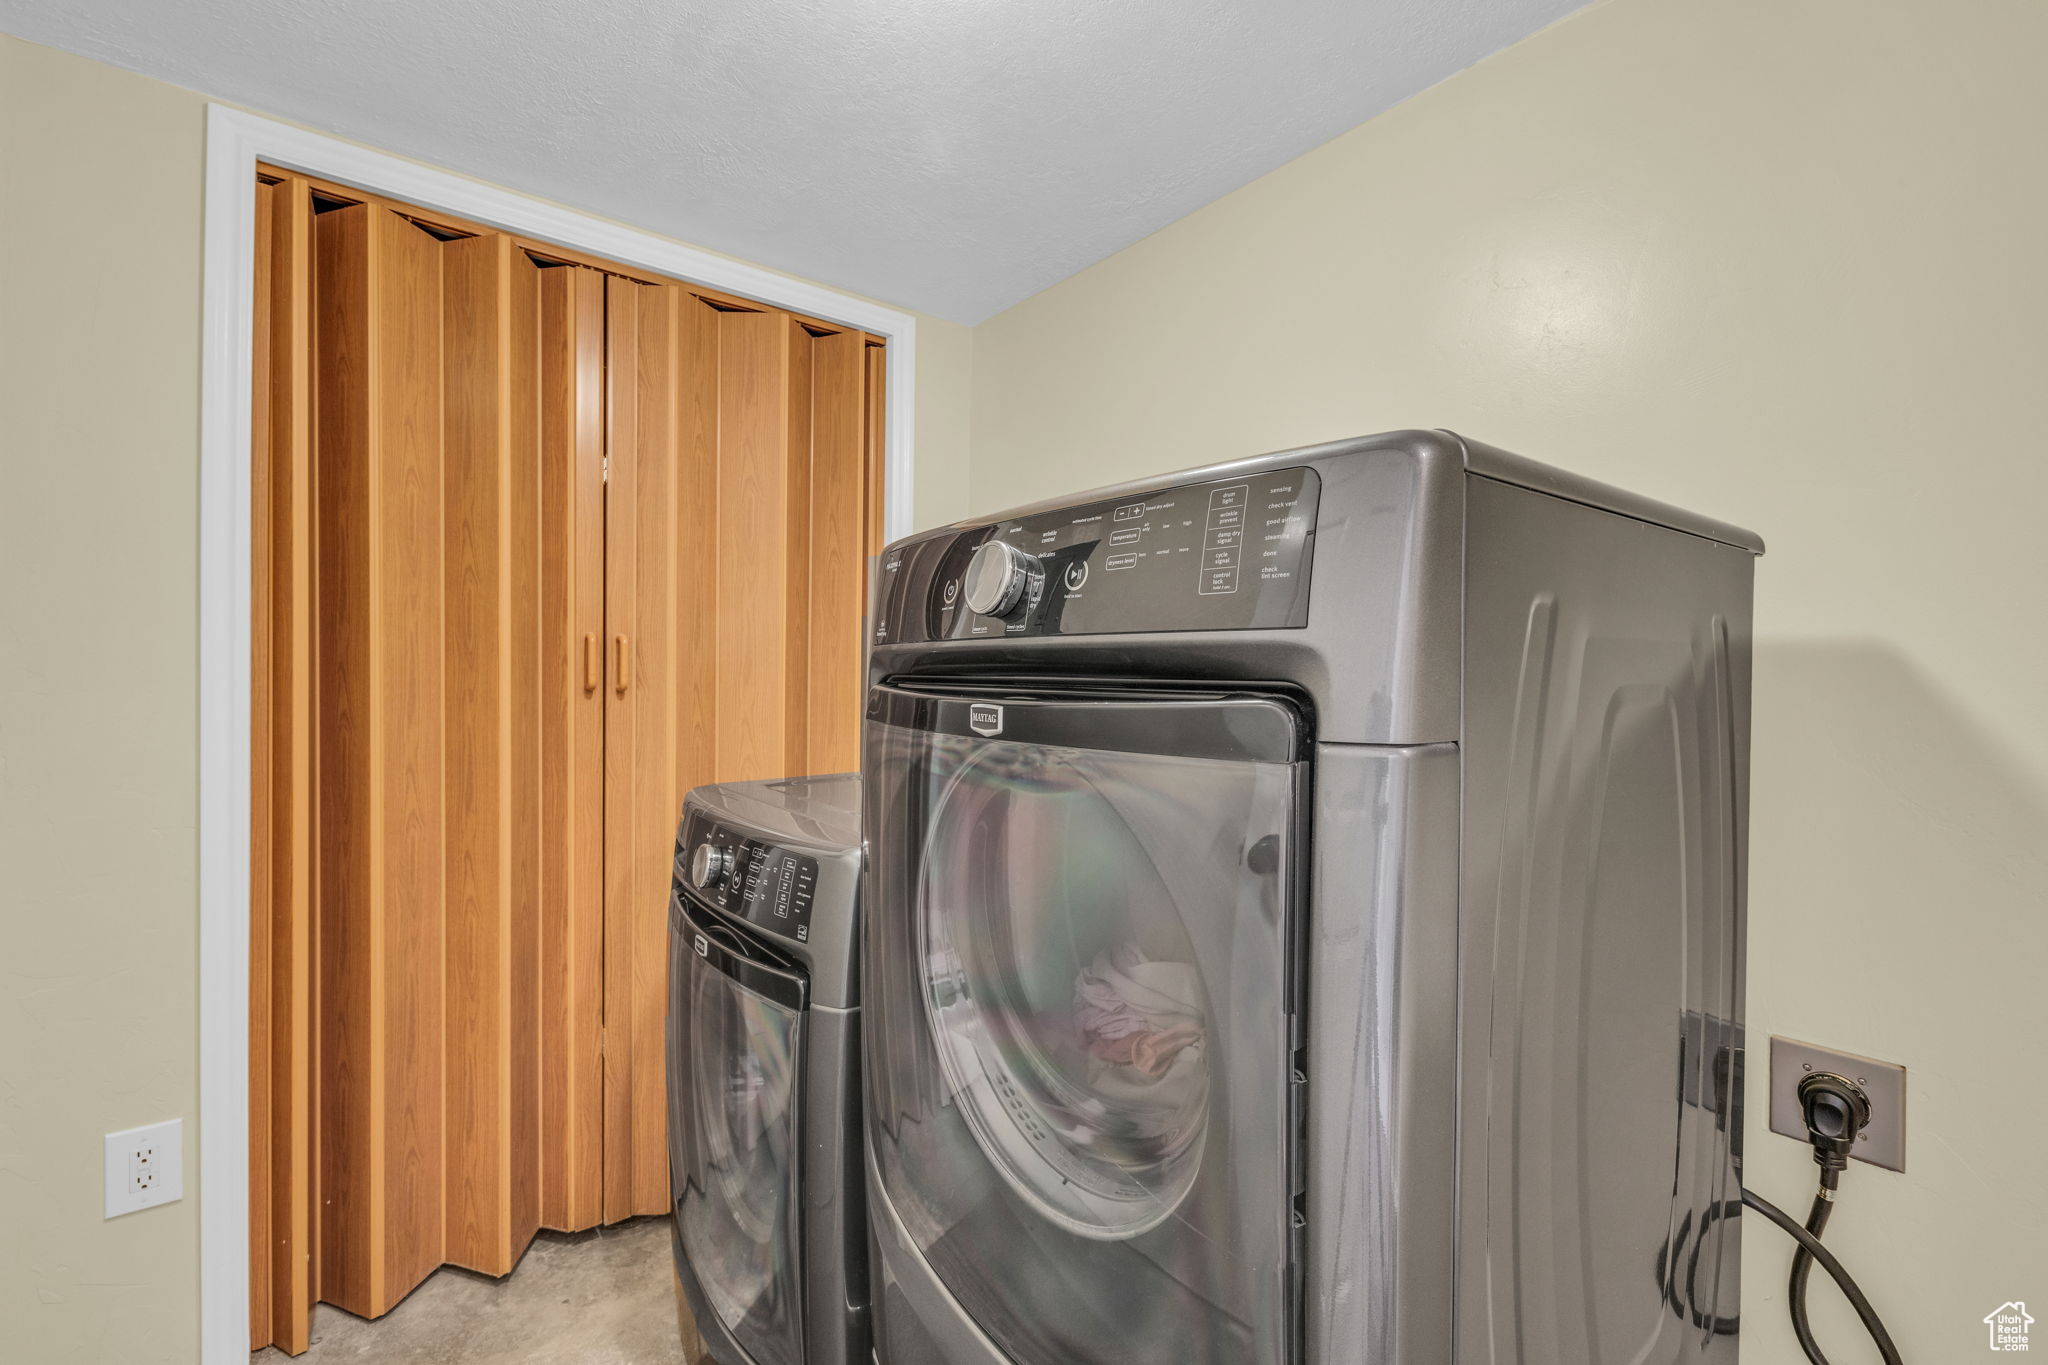 Clothes washing area with independent washer and dryer and electric dryer hookup